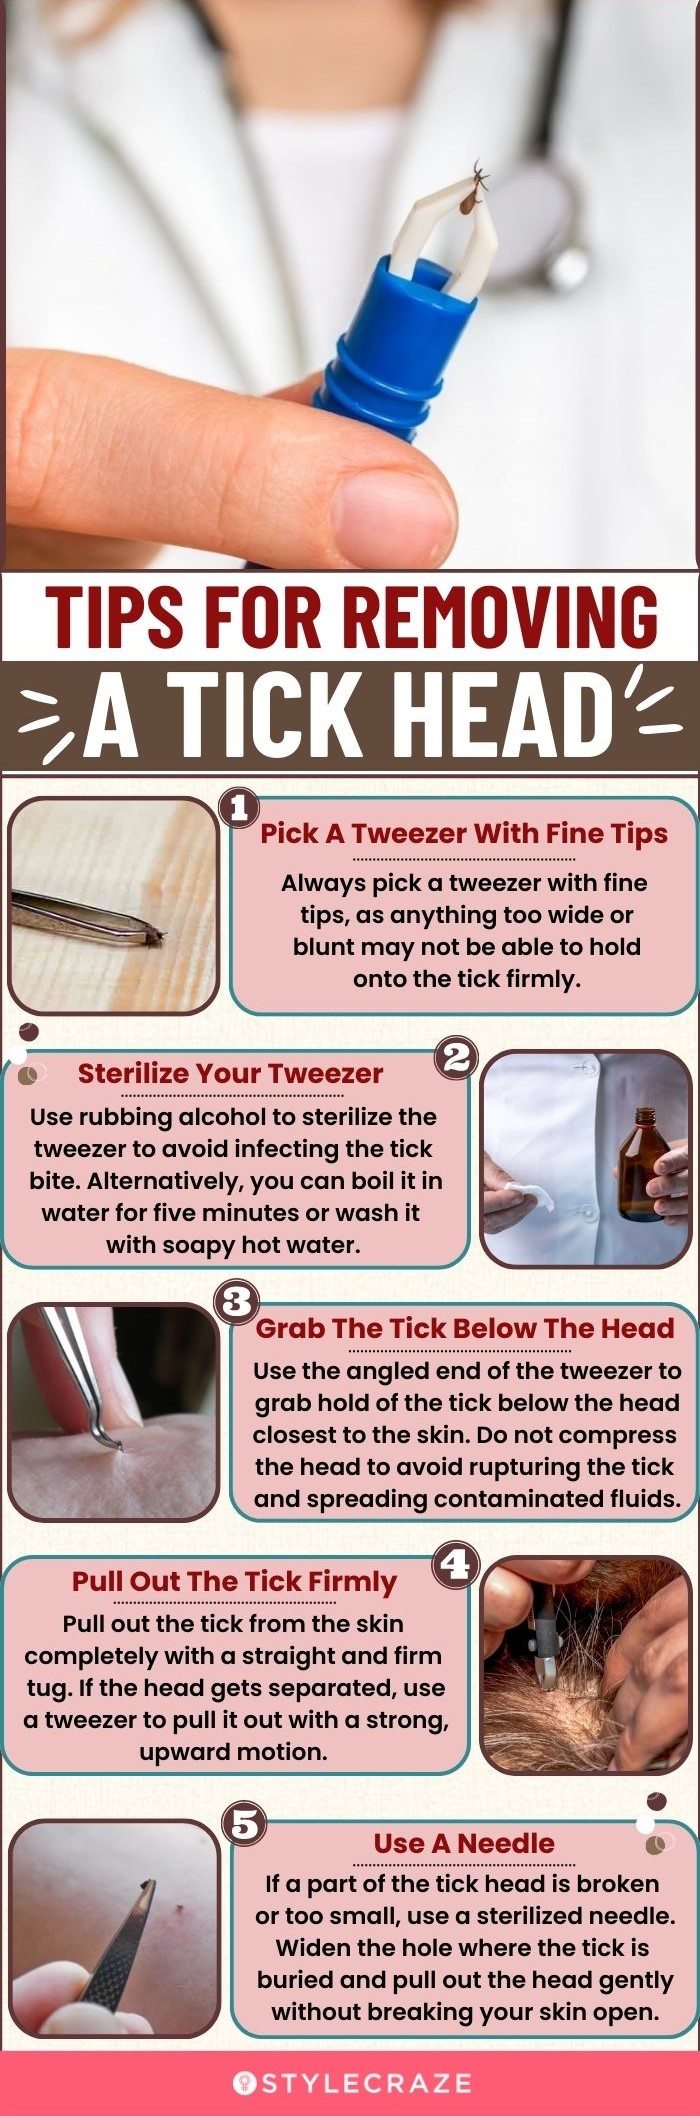 tips for removing a tick head (infographic)